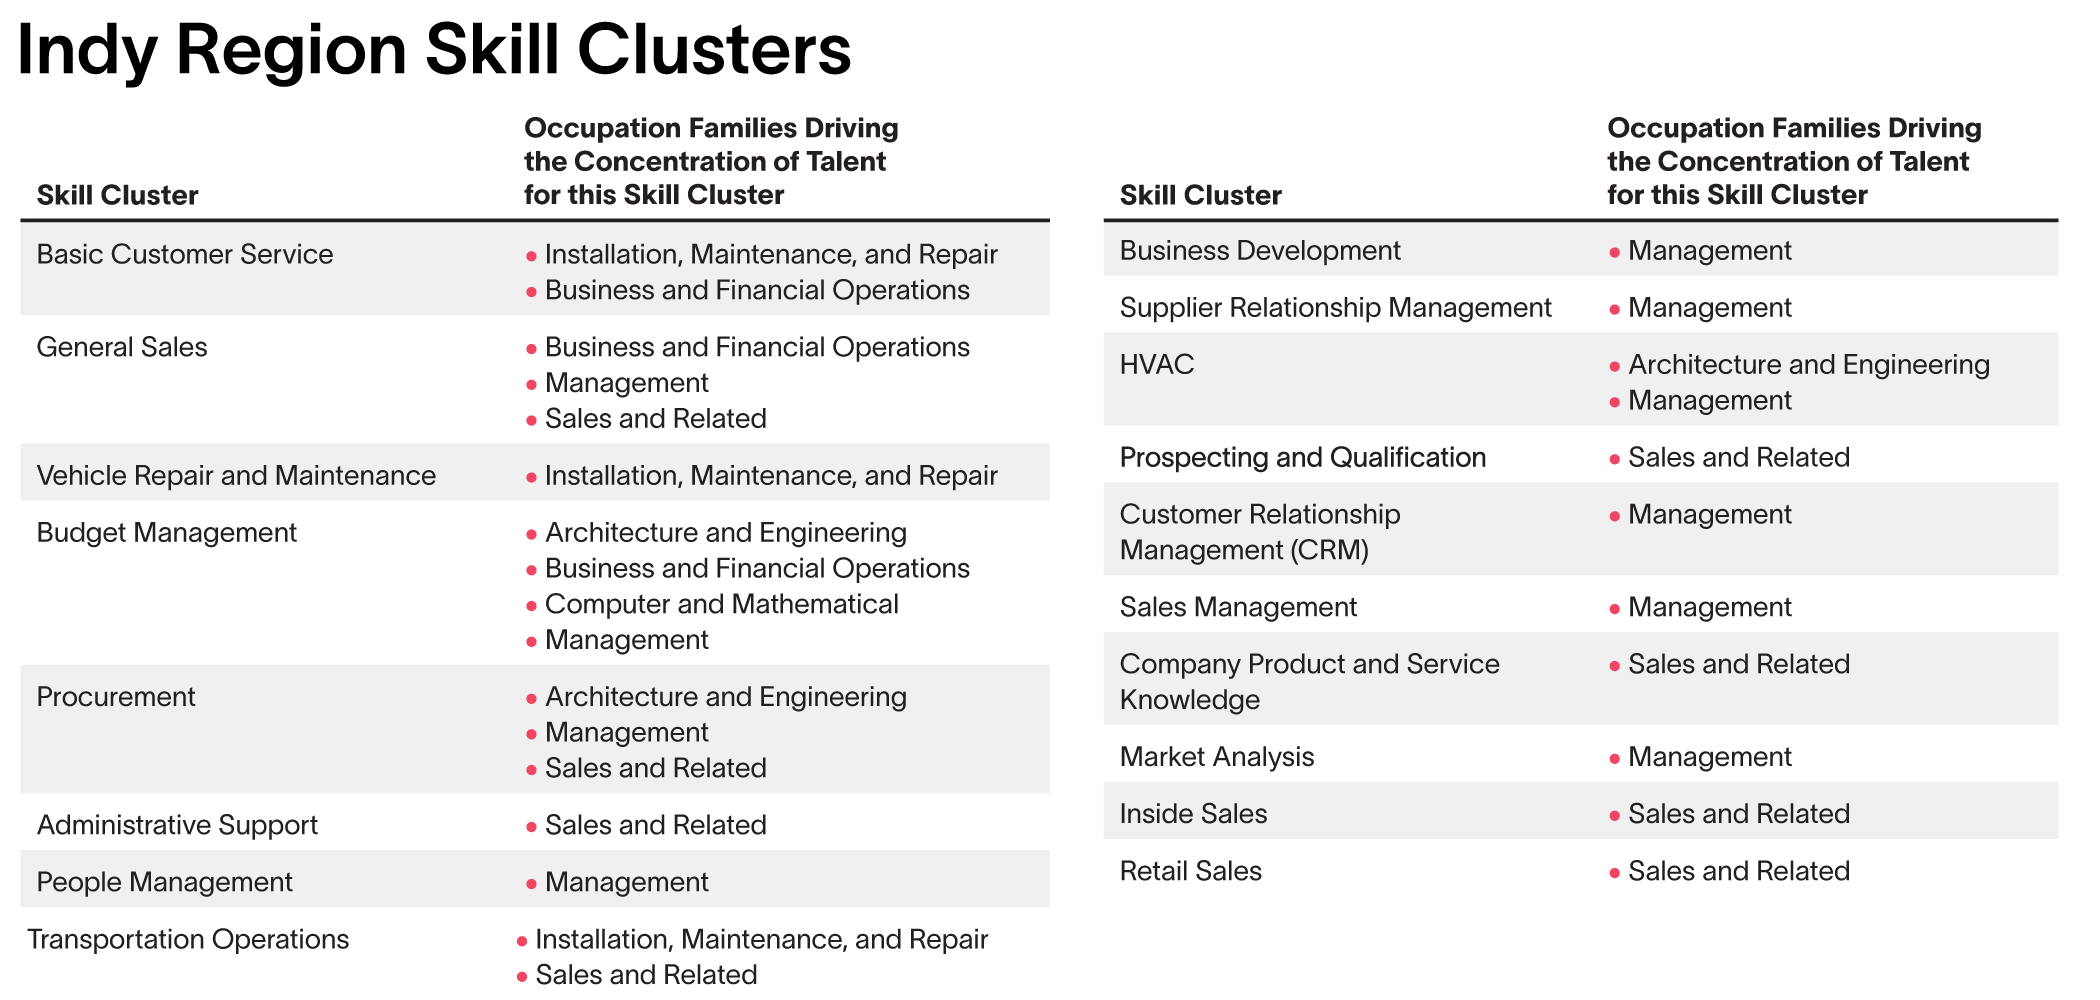 Indy Partnership Skill Clusters